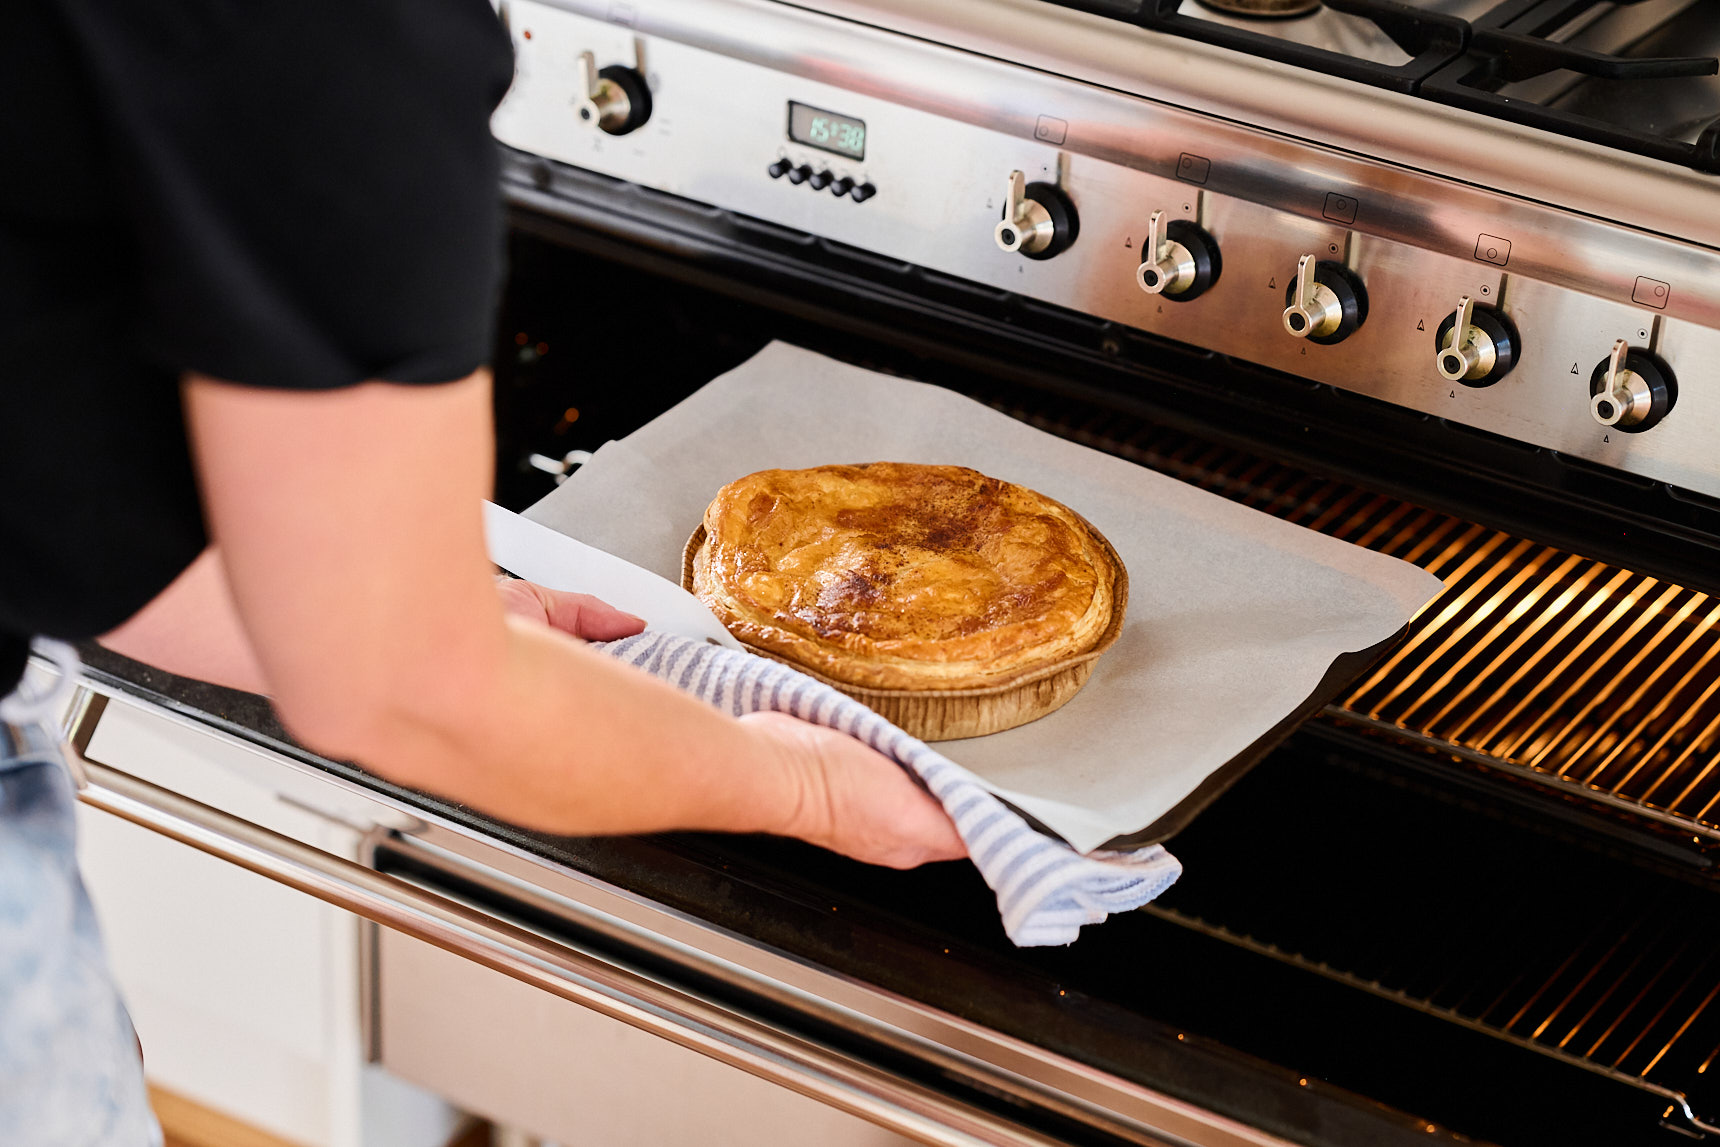 Bake at home pie being pulled from an oven